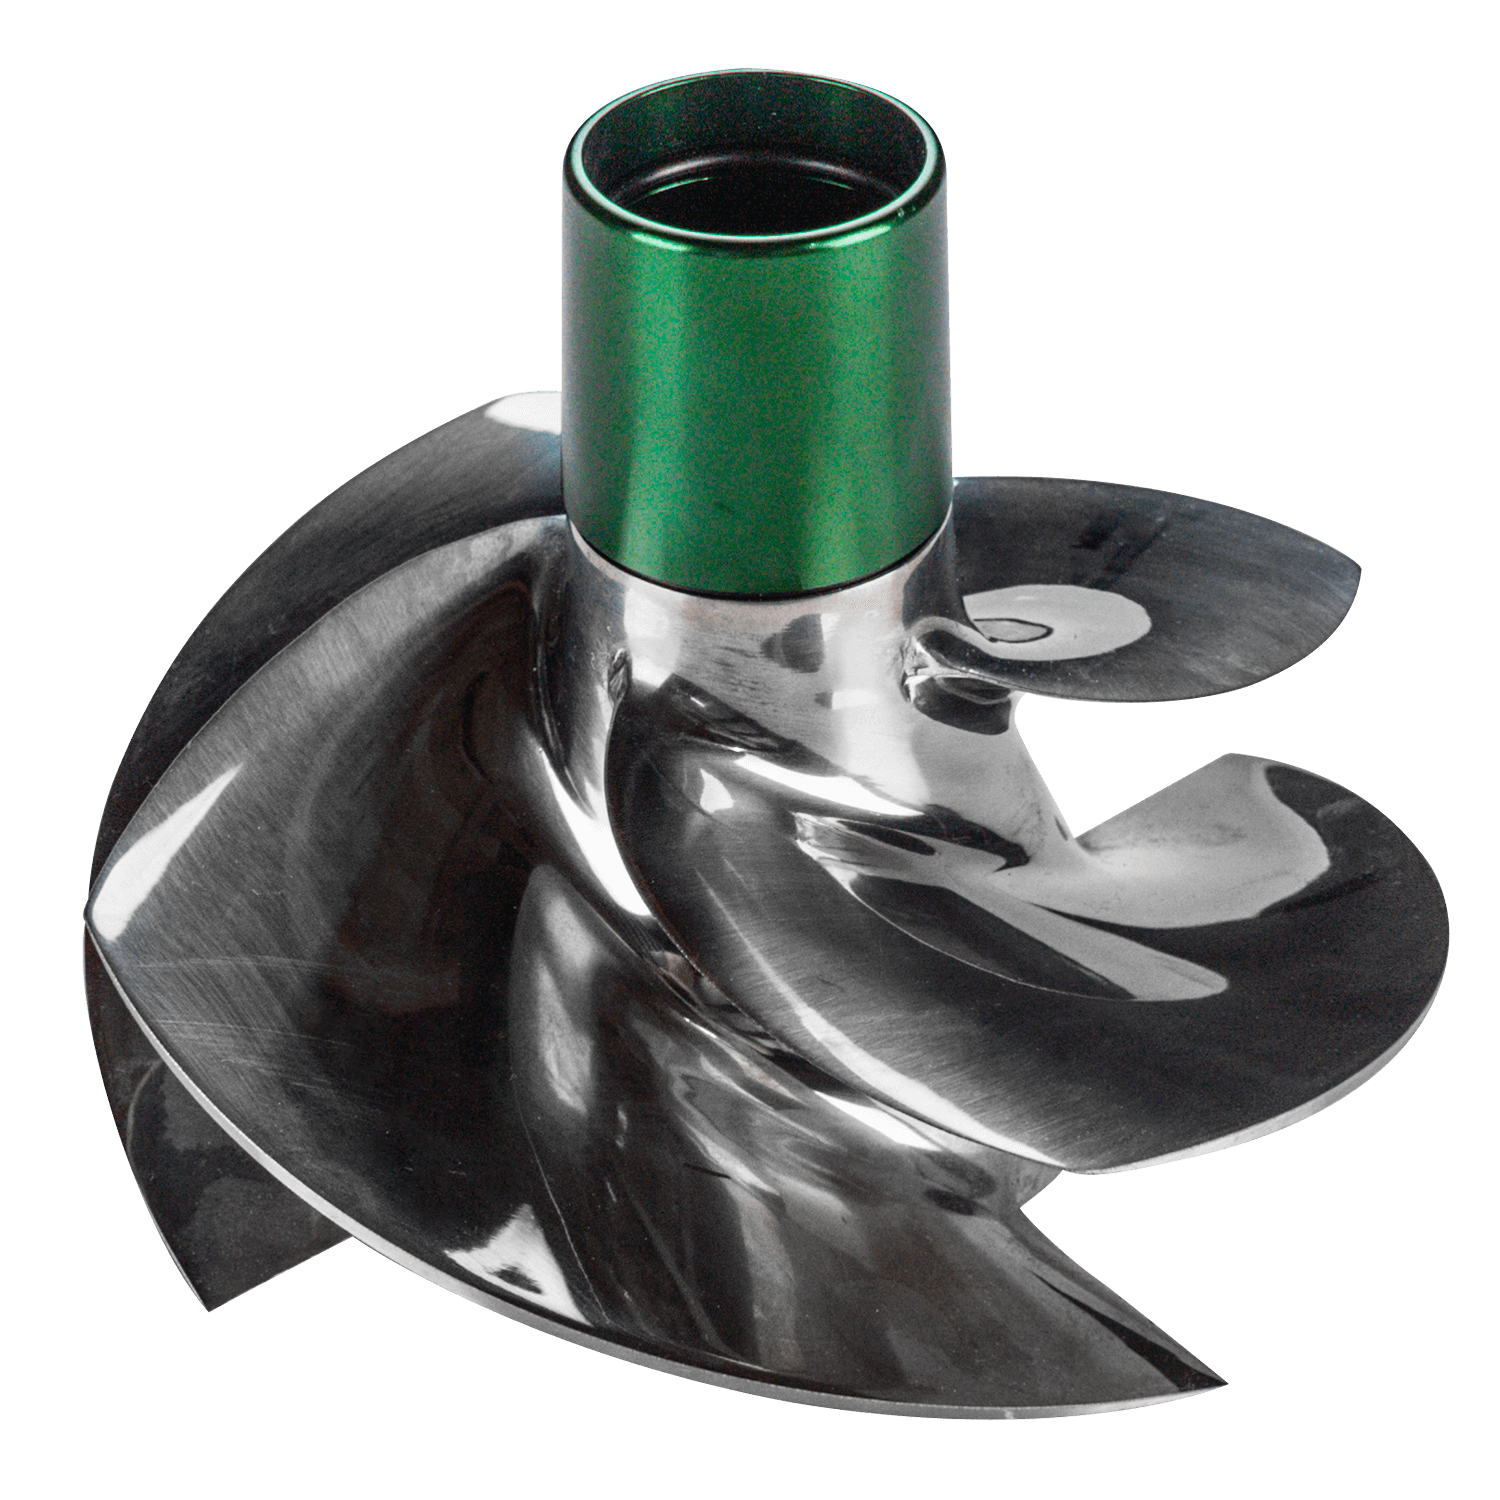 Solas 14/19A Seadoo Reflashed 09-10 RXP, RXT 215/09-15 GTX 215 Impeller